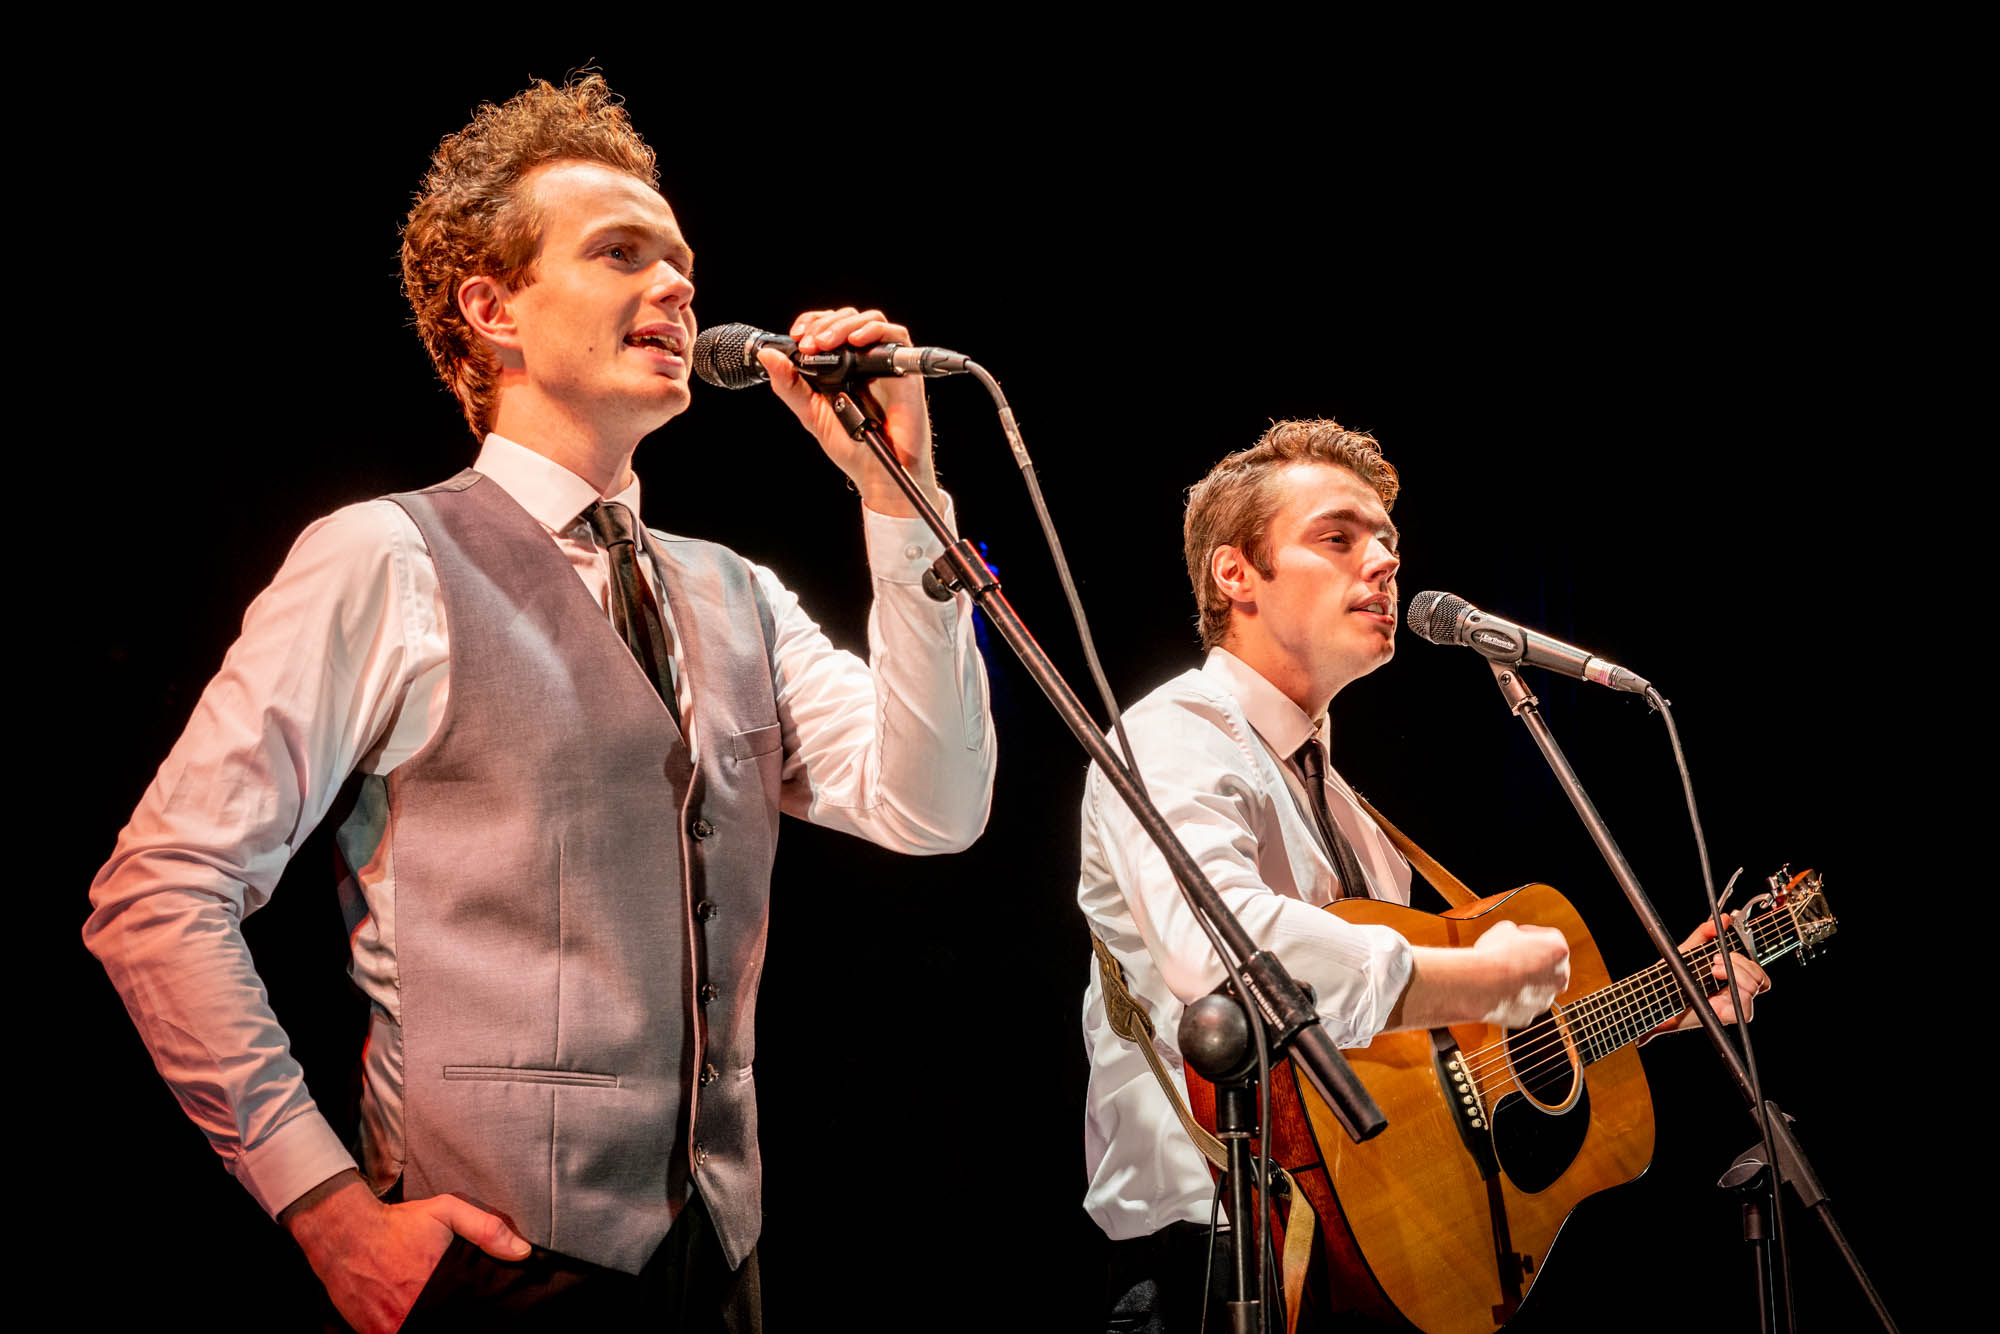 TGt Meets...The Performers from The Simon & Garfunkel Show at The Wyvern Theatre